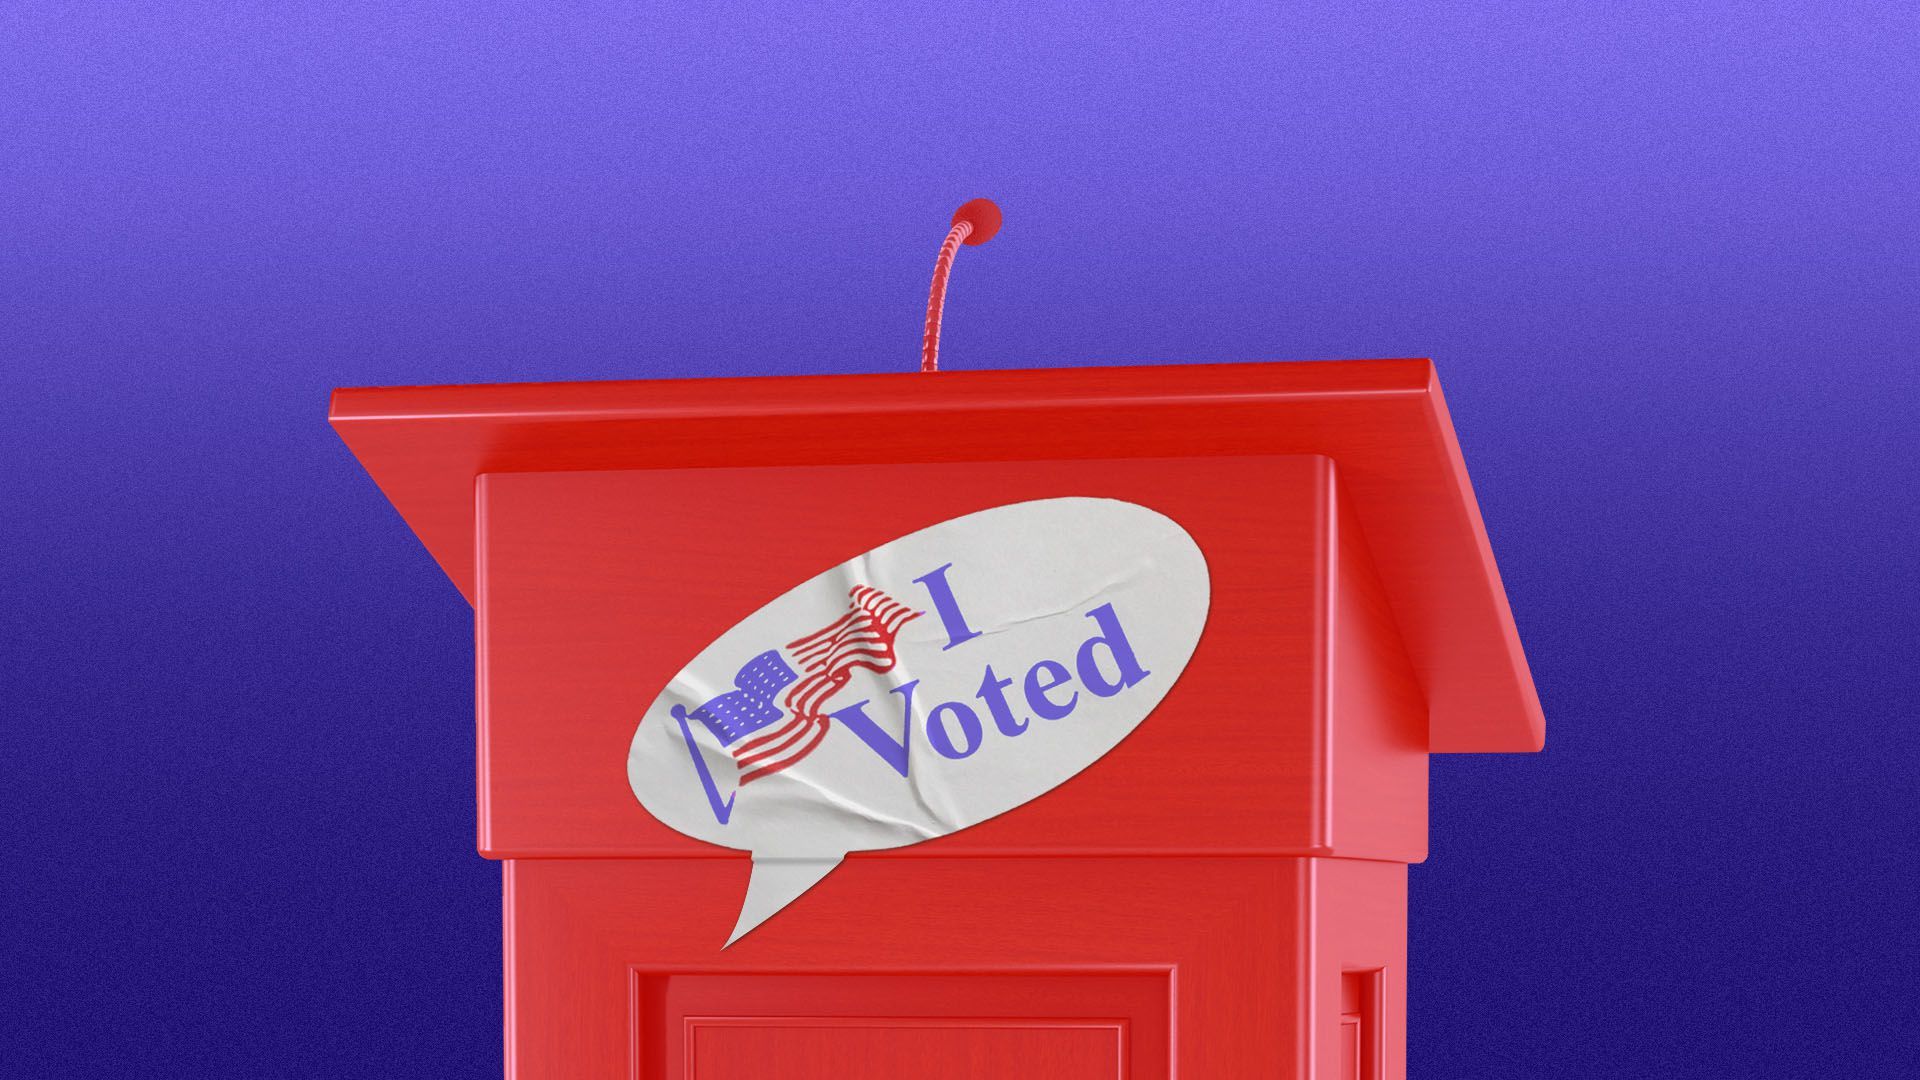 Illustration of a podium with an "I voted" sticker shaped like a speech bubble